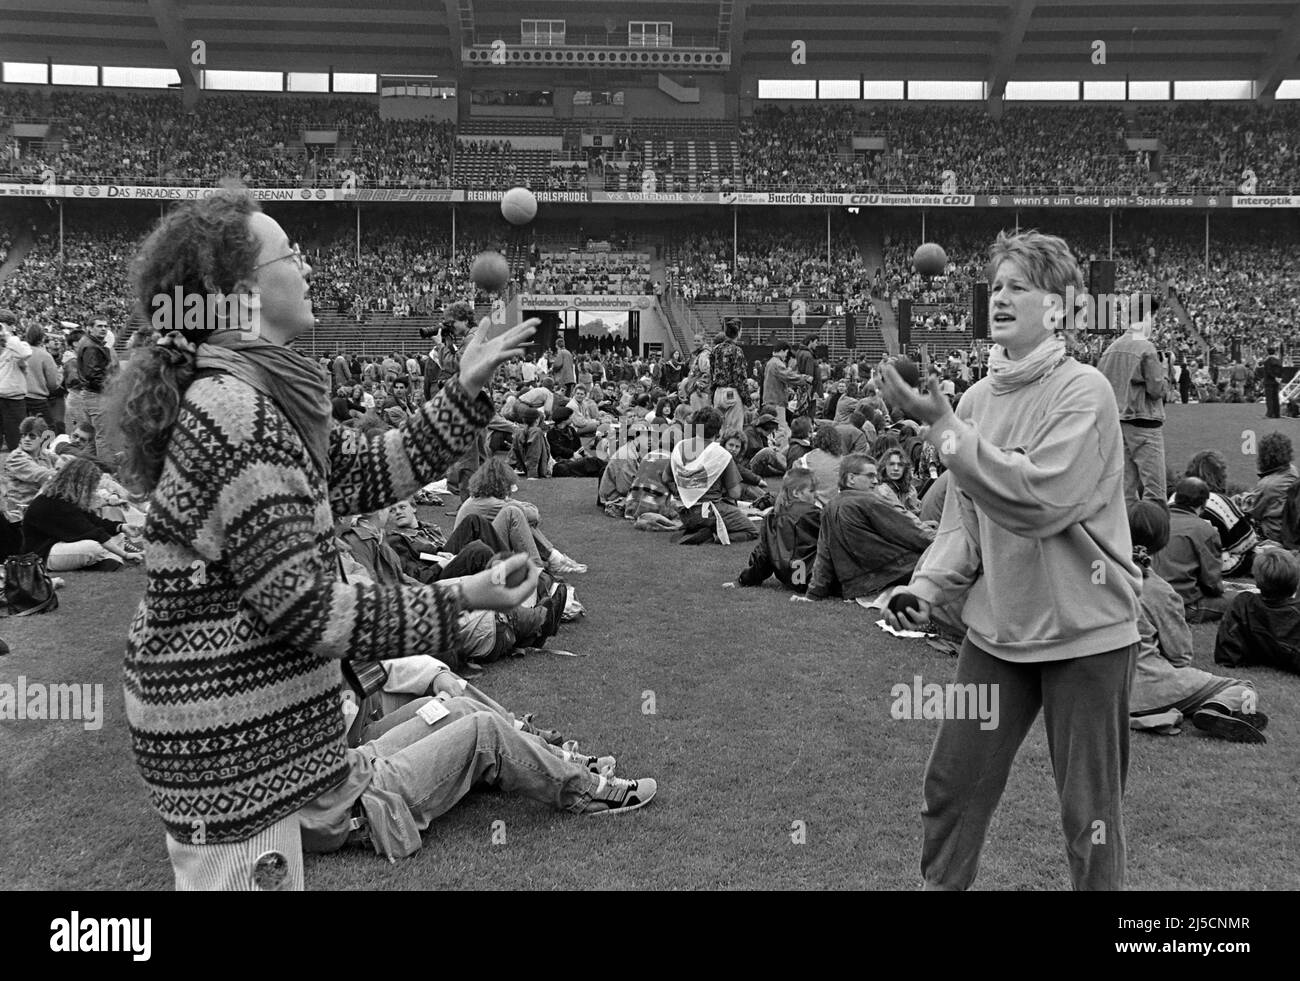 'Gelsenkirchen, DEU, 09.06.1991 - Closing service of the 24th German Protestant Church Congress in Gelsenkirchen Park Stadium.... The church congress took place from June 5 to 9, 1991 in the Ruhr area under the motto ''God's Spirit frees us to live''. It was the first church congress after the reunification. [automated translation]' Stock Photo